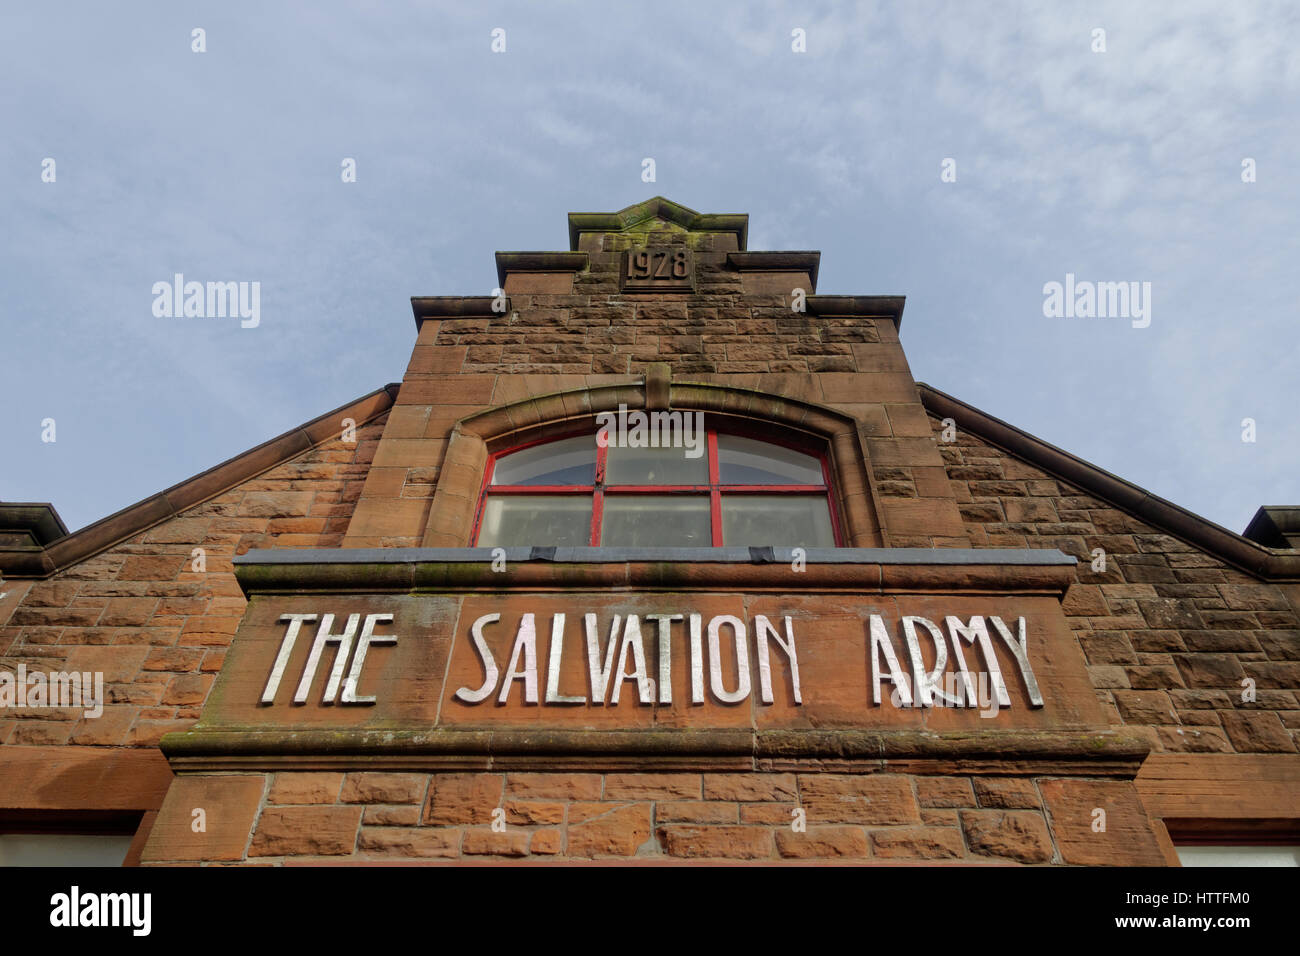 the salvation army hall sign Clydebank scotland Stock Photo